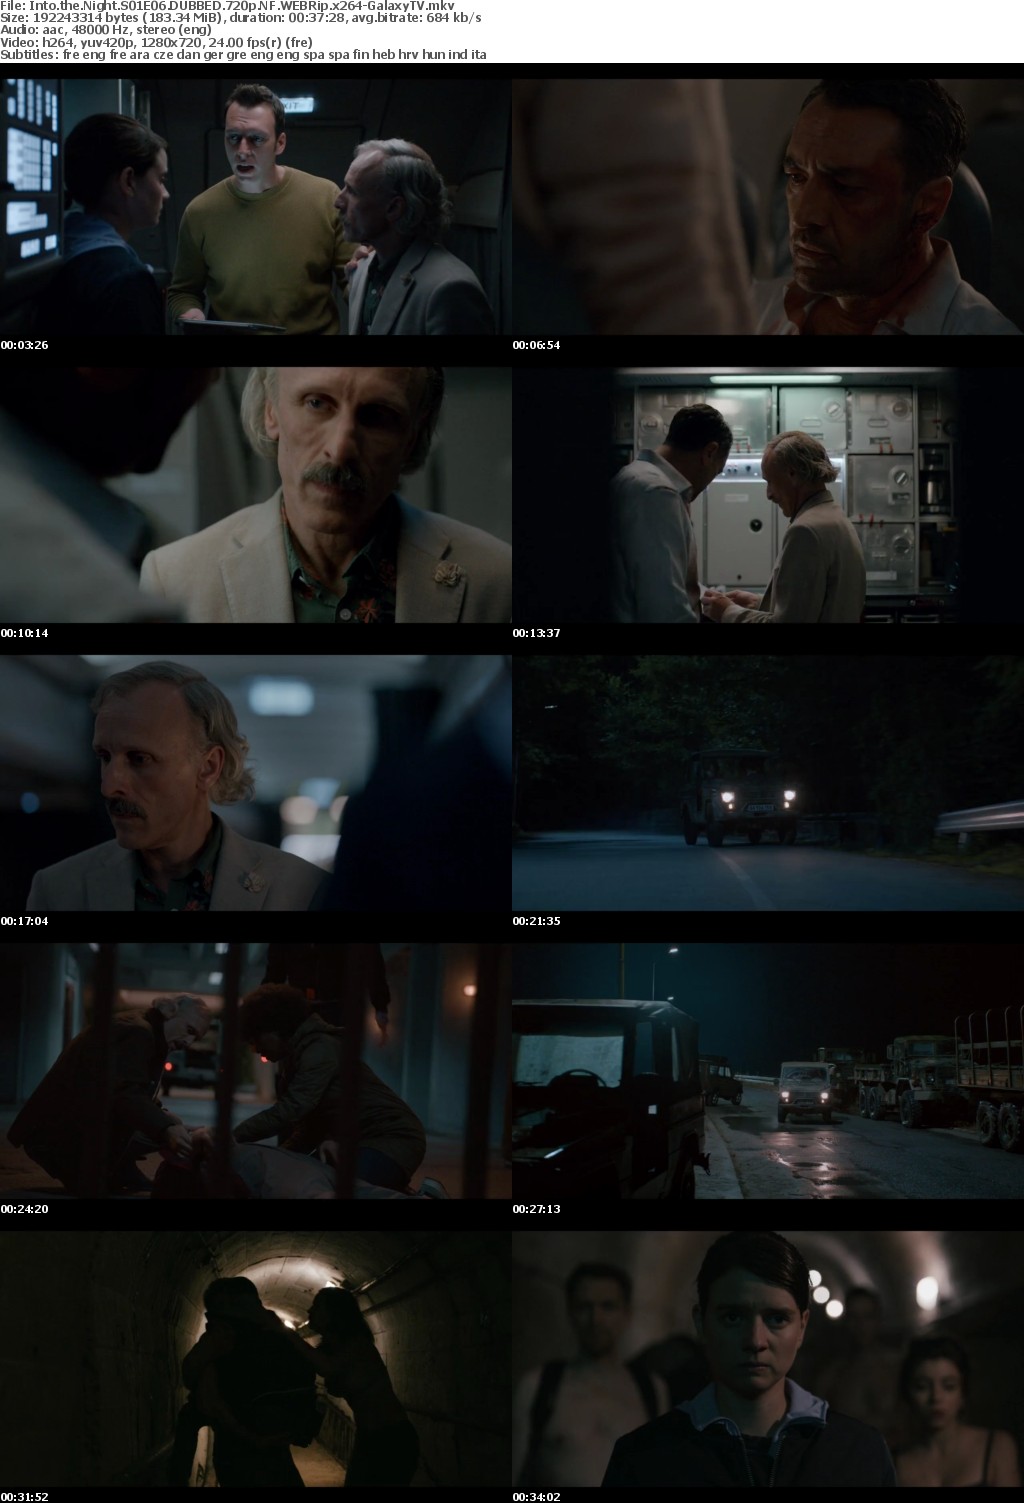 Into the Night S01 COMPLETE DUBBED 720p NF WEBRip x264-GalaxyTV